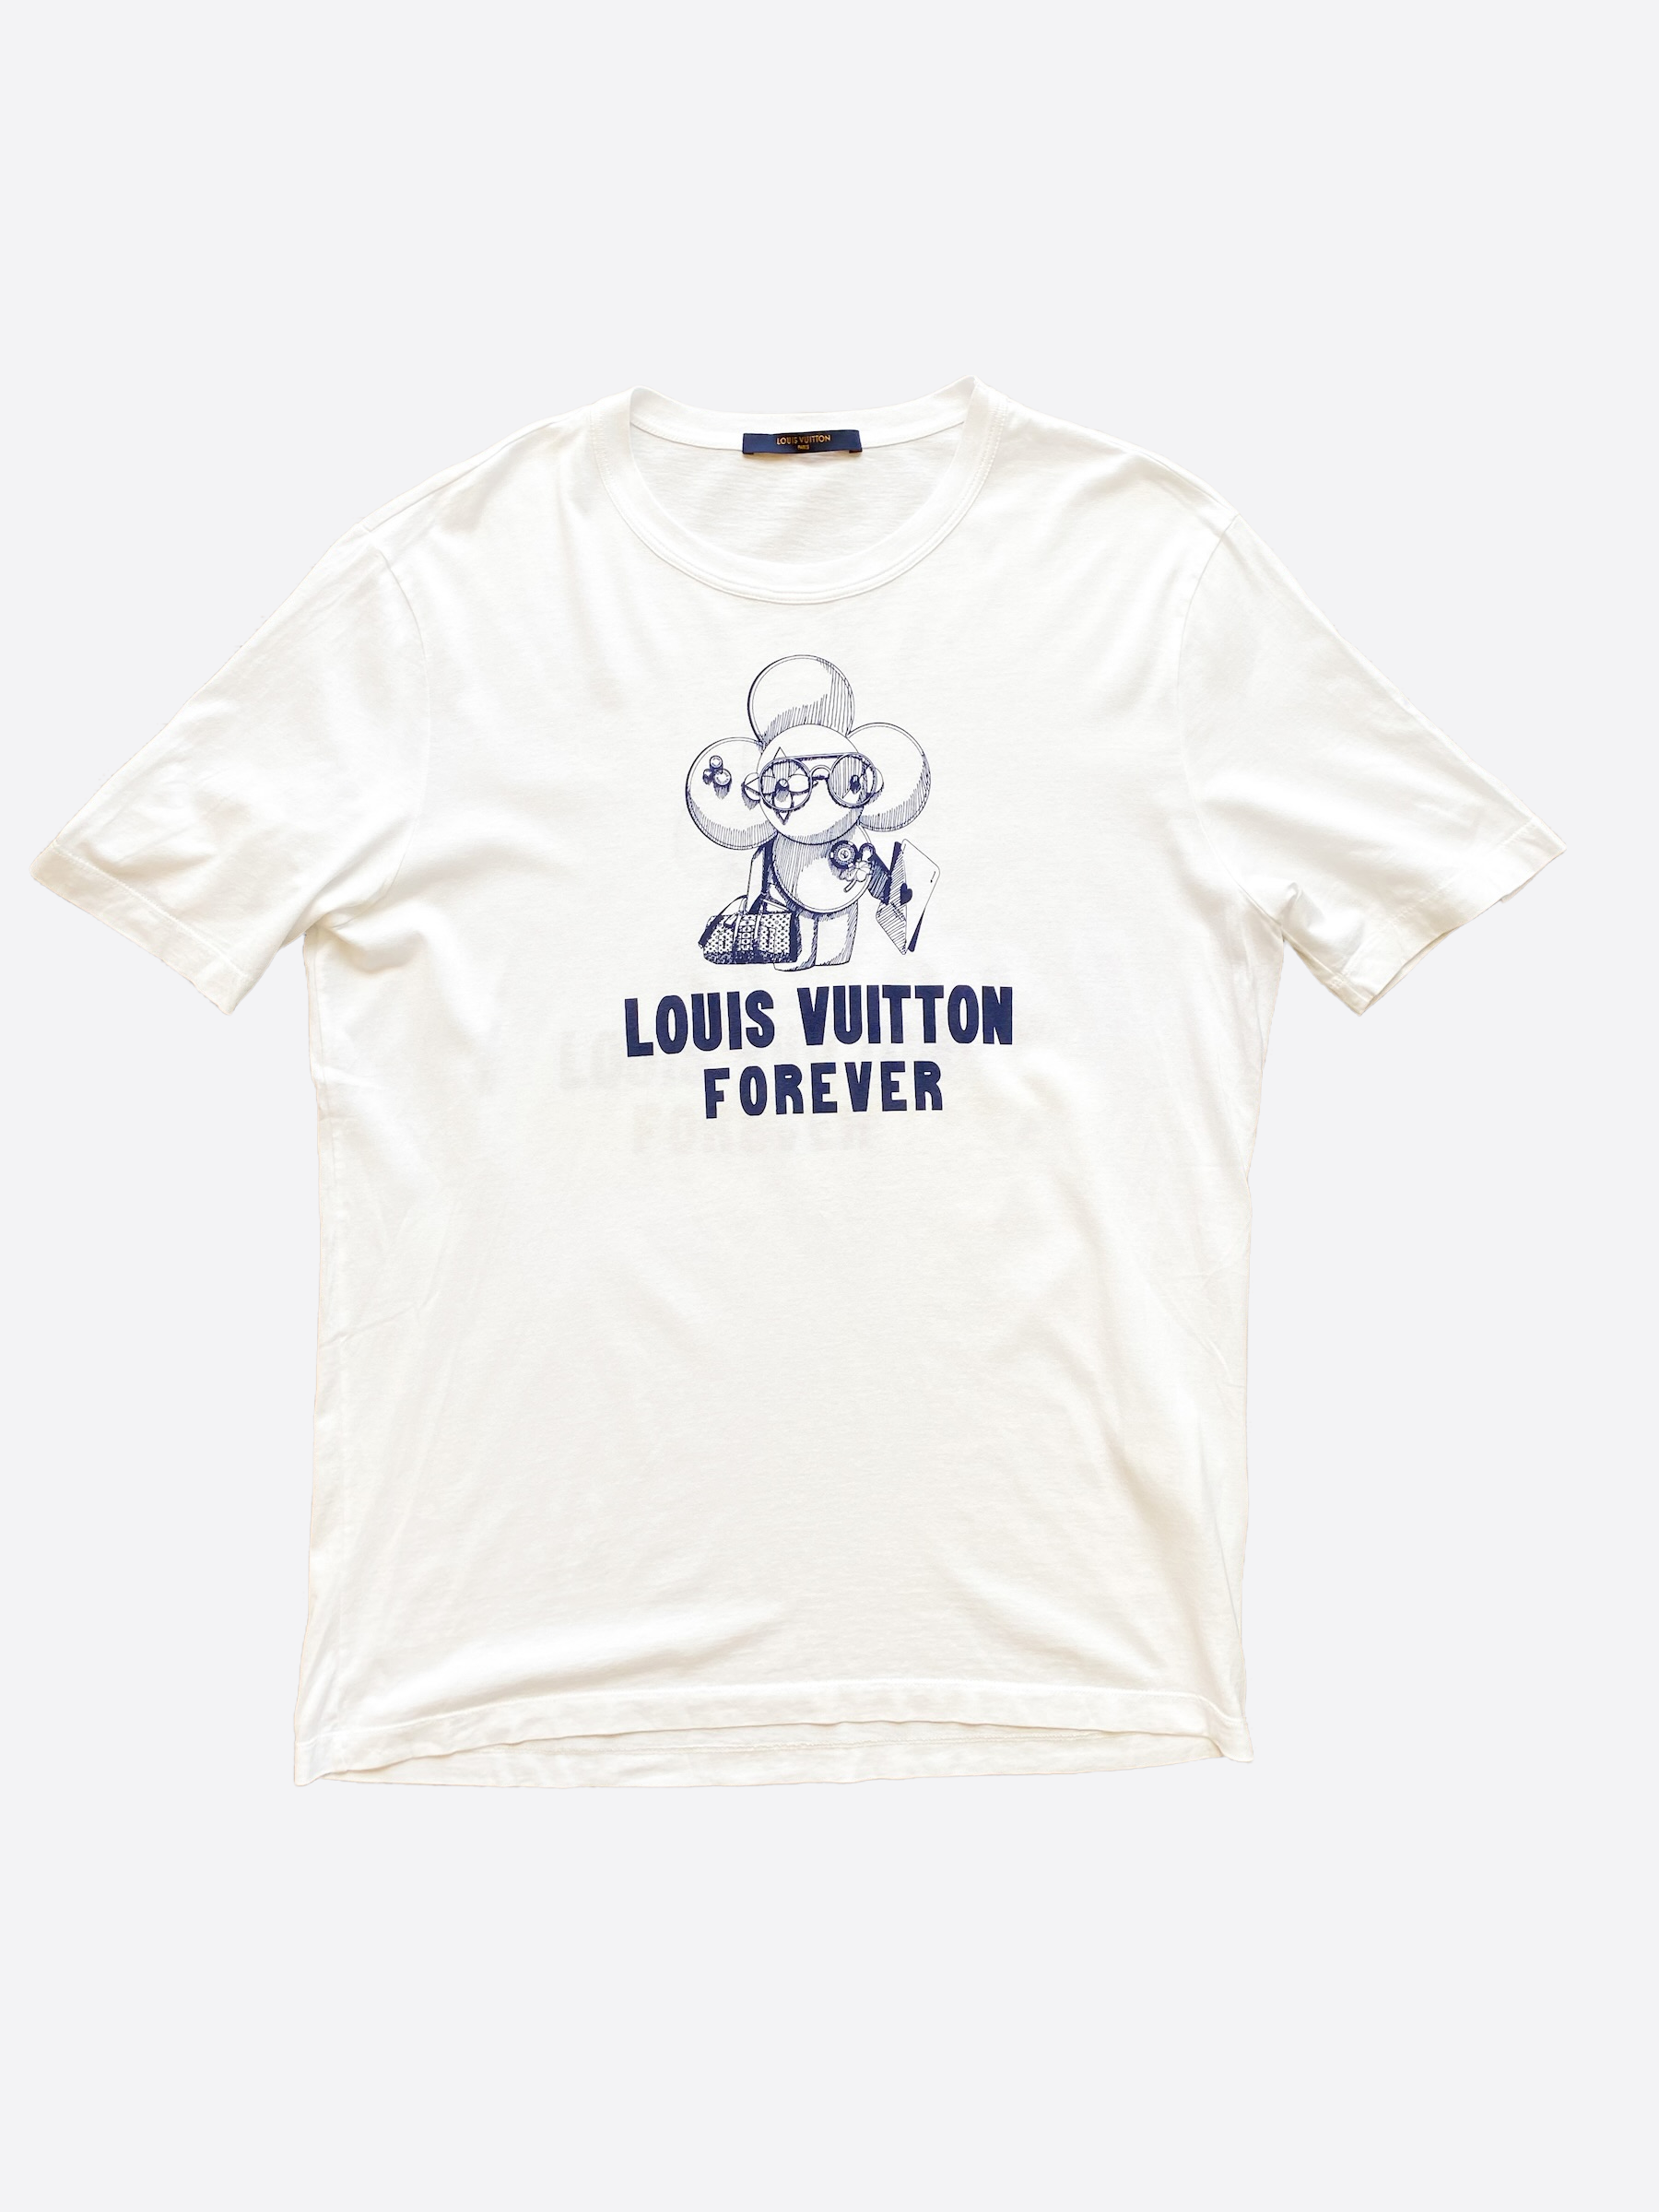 Louis Vuitton Forever Graphic T-Shirt - Blue T-Shirts, Clothing